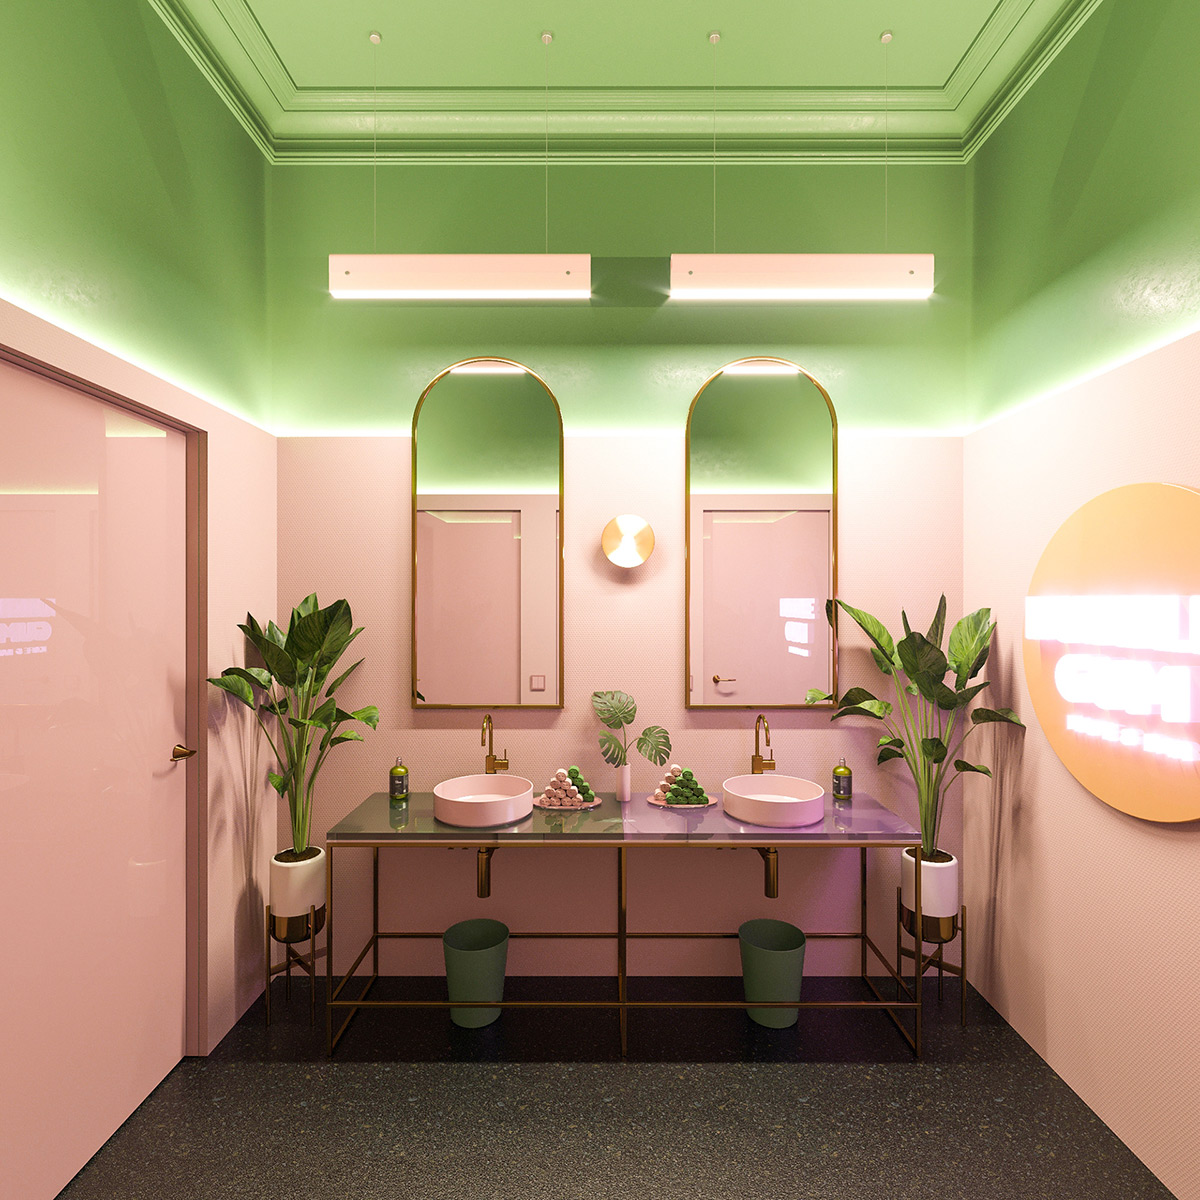 Pink and green bathroom decor produces a fun, tropical vibe. Add a playful neon wall sign and tropical plants to enhance the vibe.